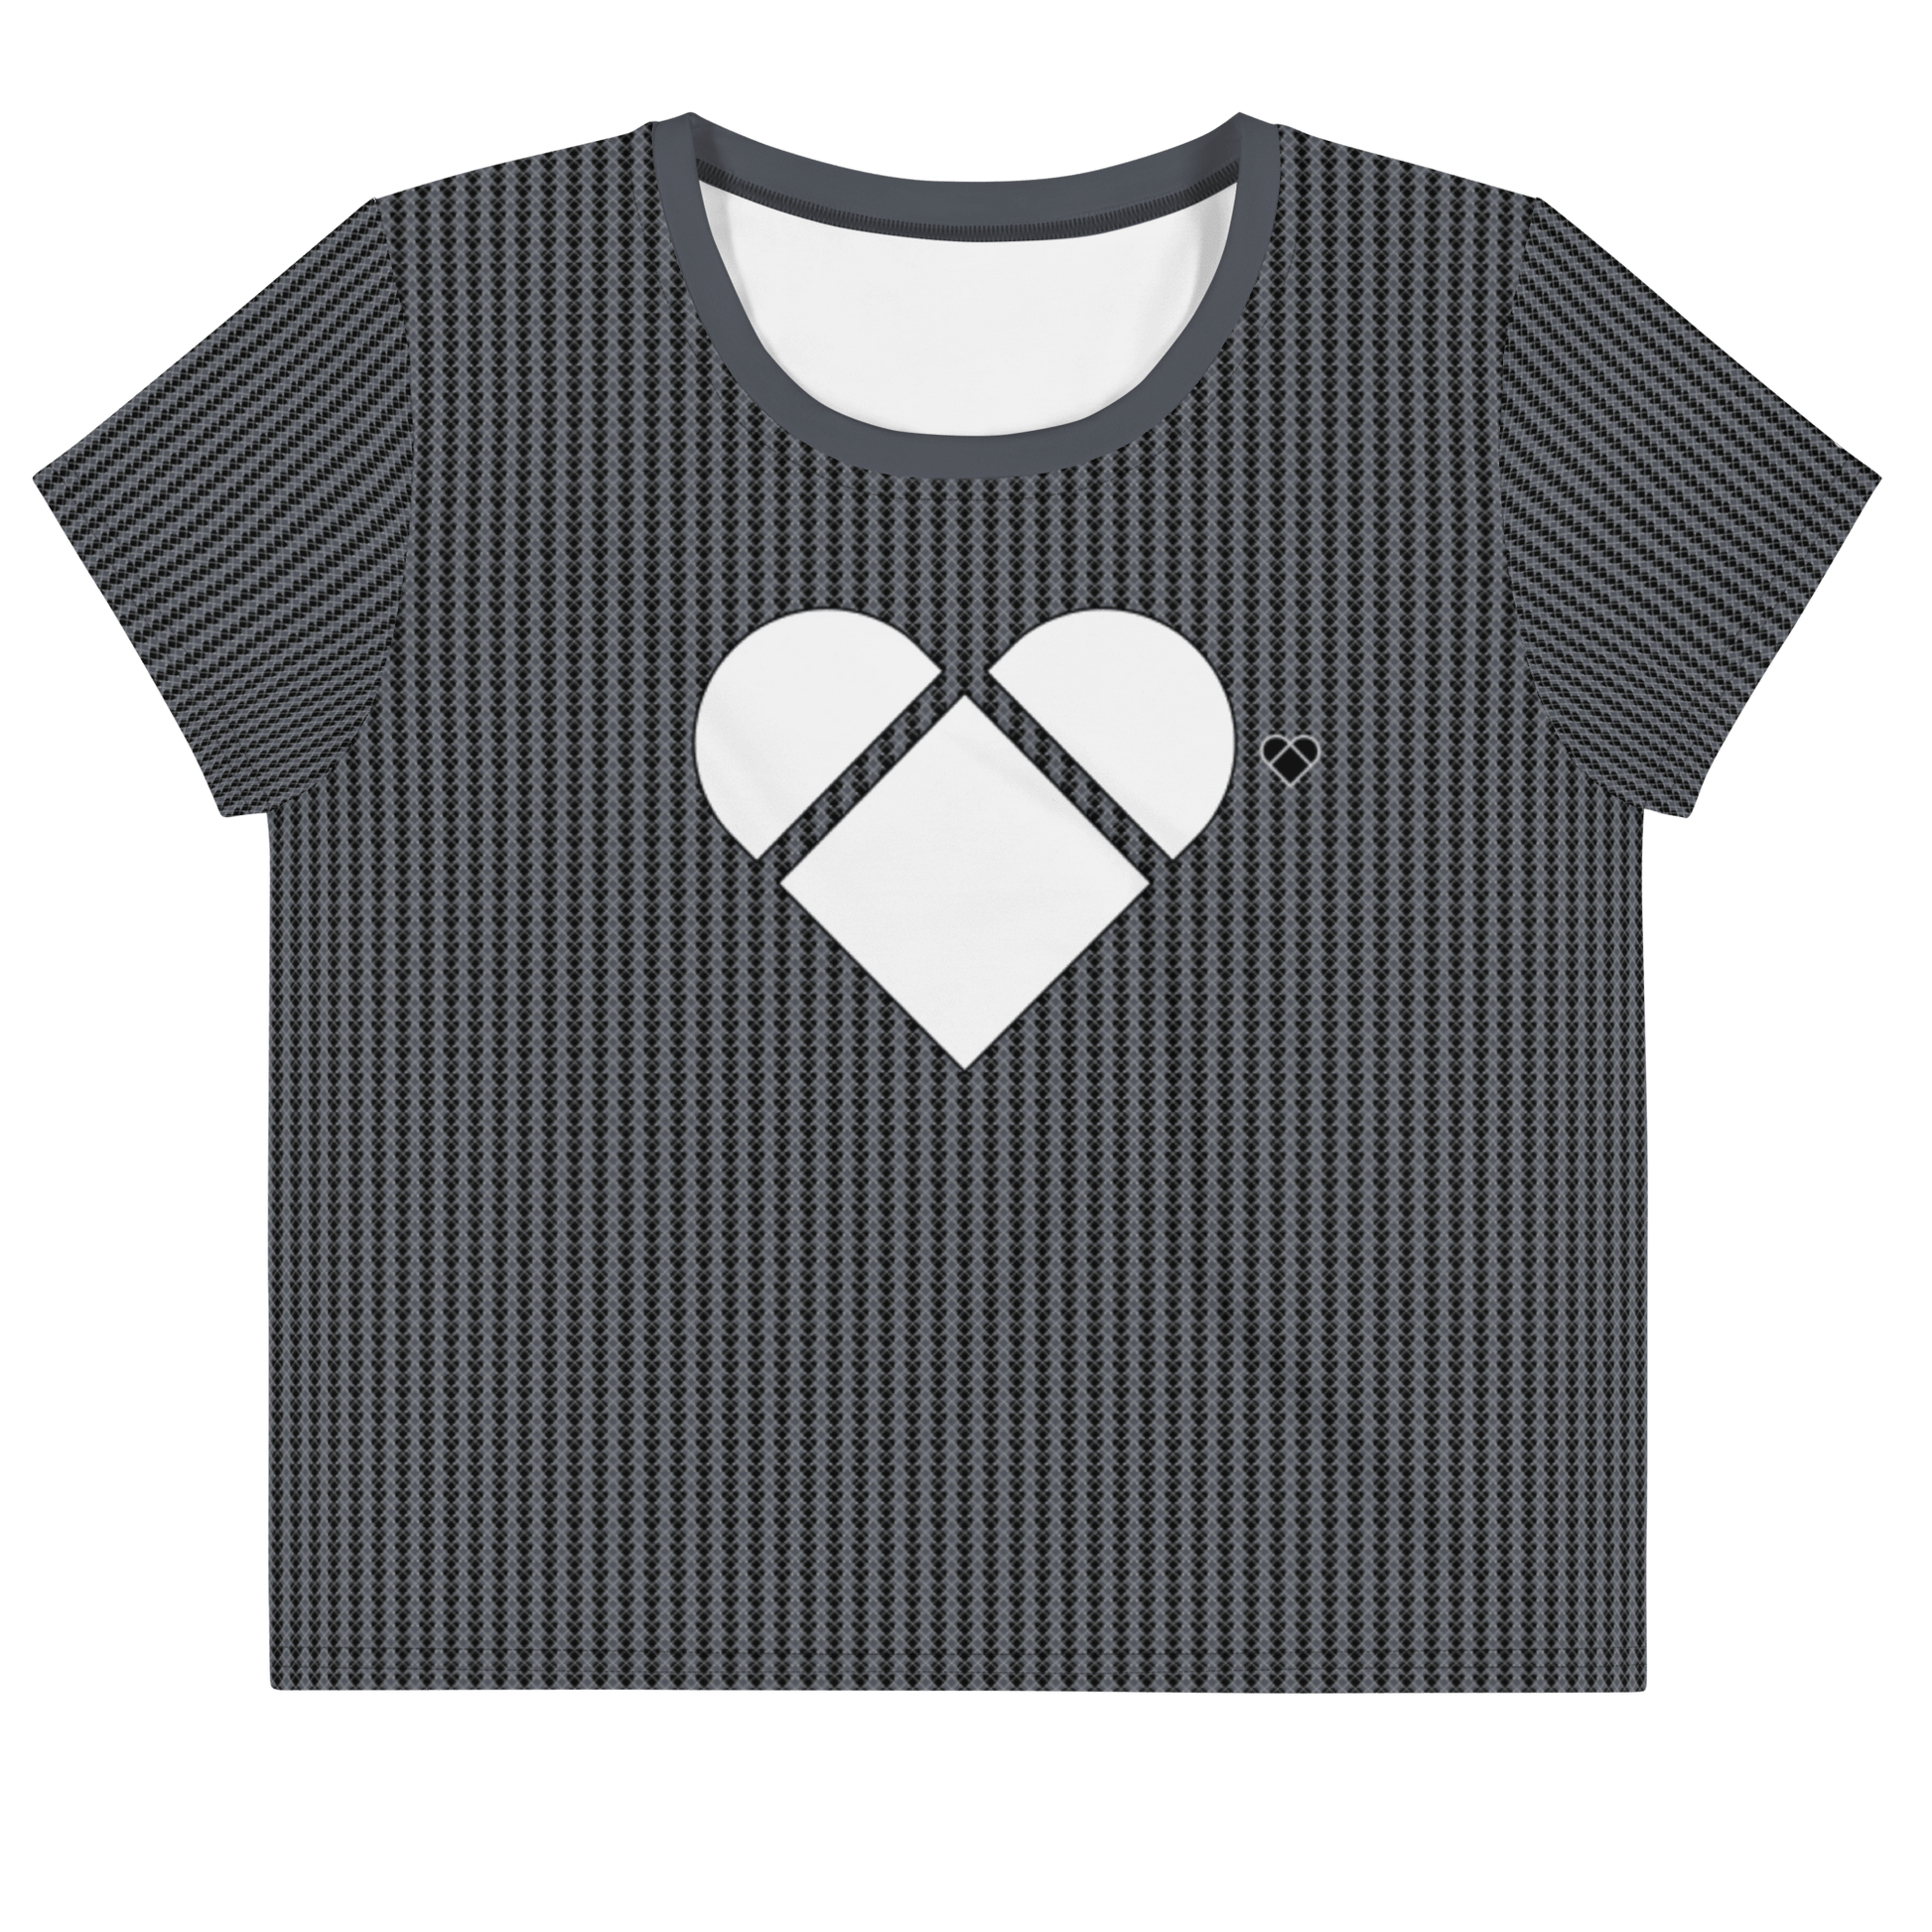 CRiZ AMOR's Black Crop Tee for Women with a unique pattern of little heart-shaped geometrical logos and a big white heart in front that symbolizes self-love